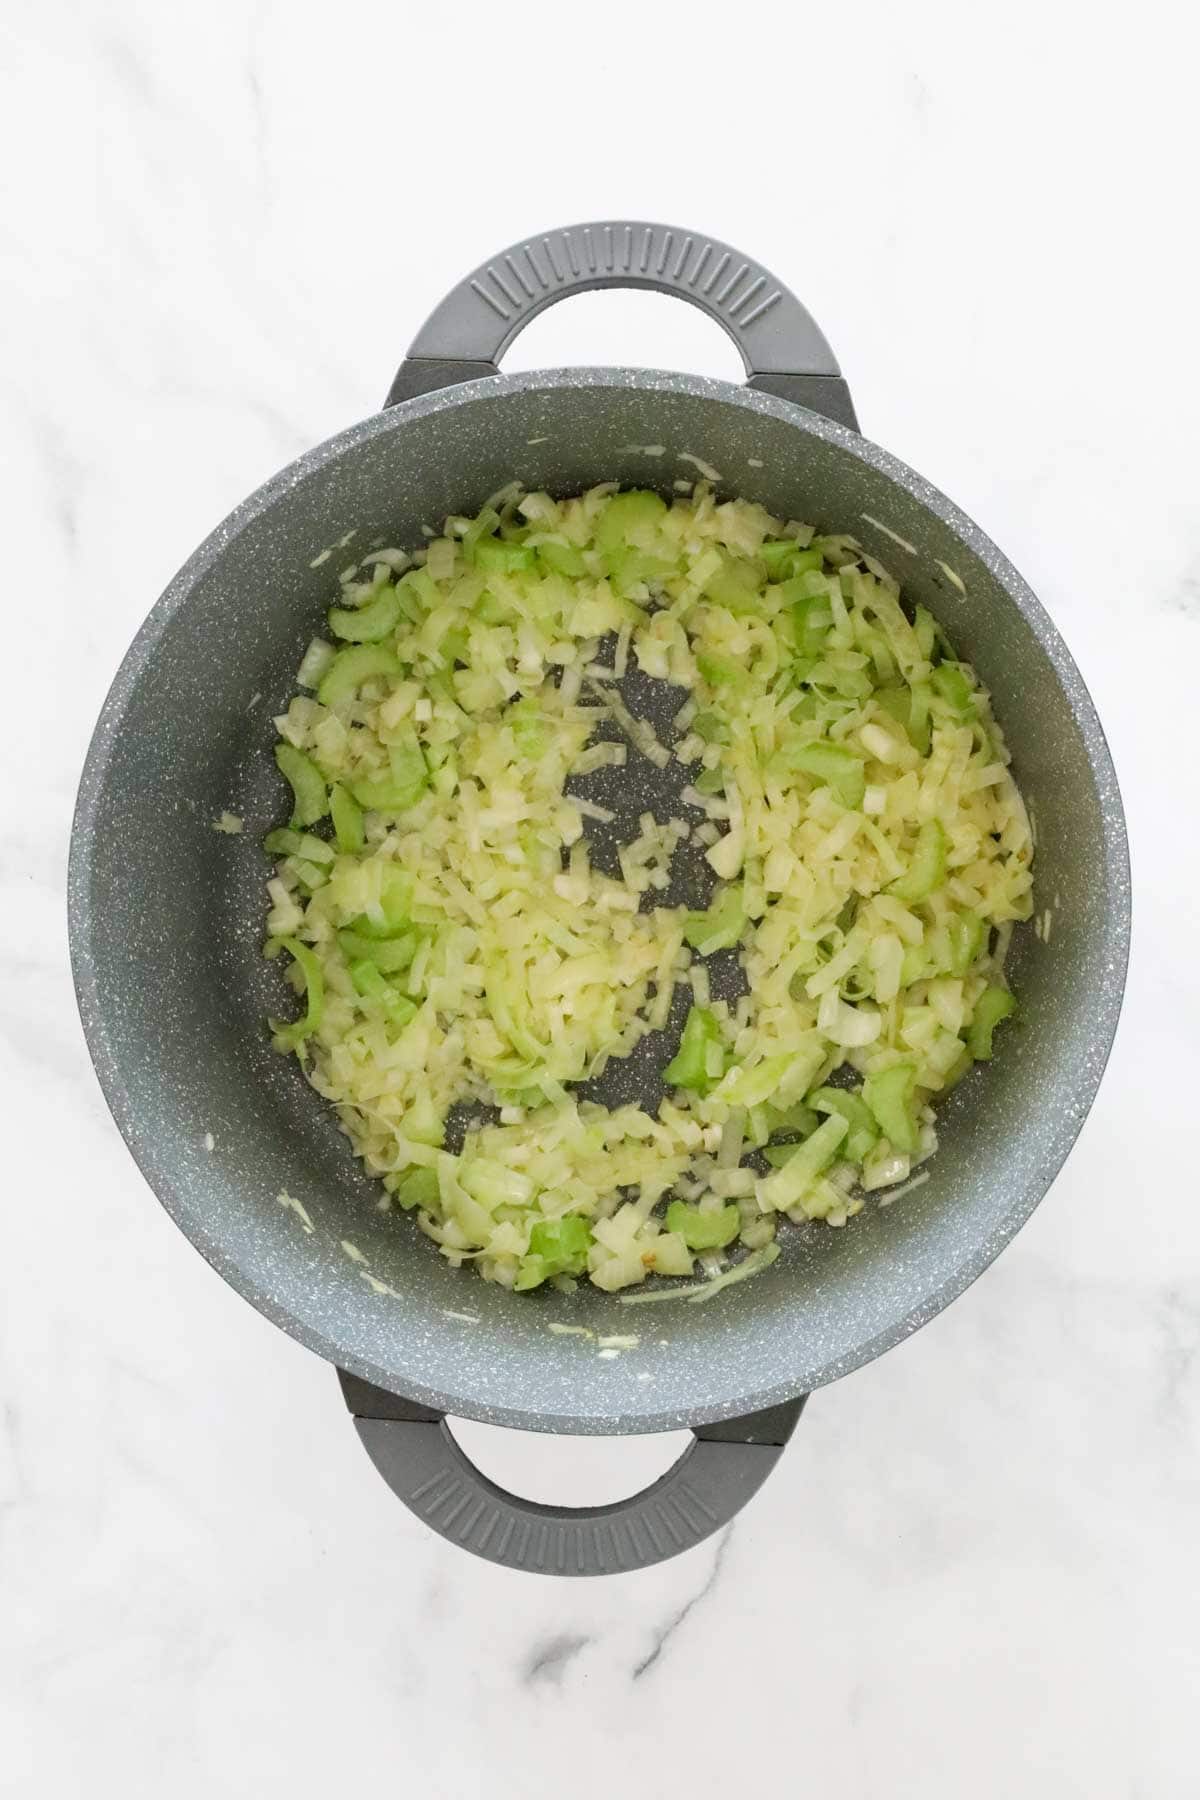 Onion, celery and leek being sauteed in the pot.